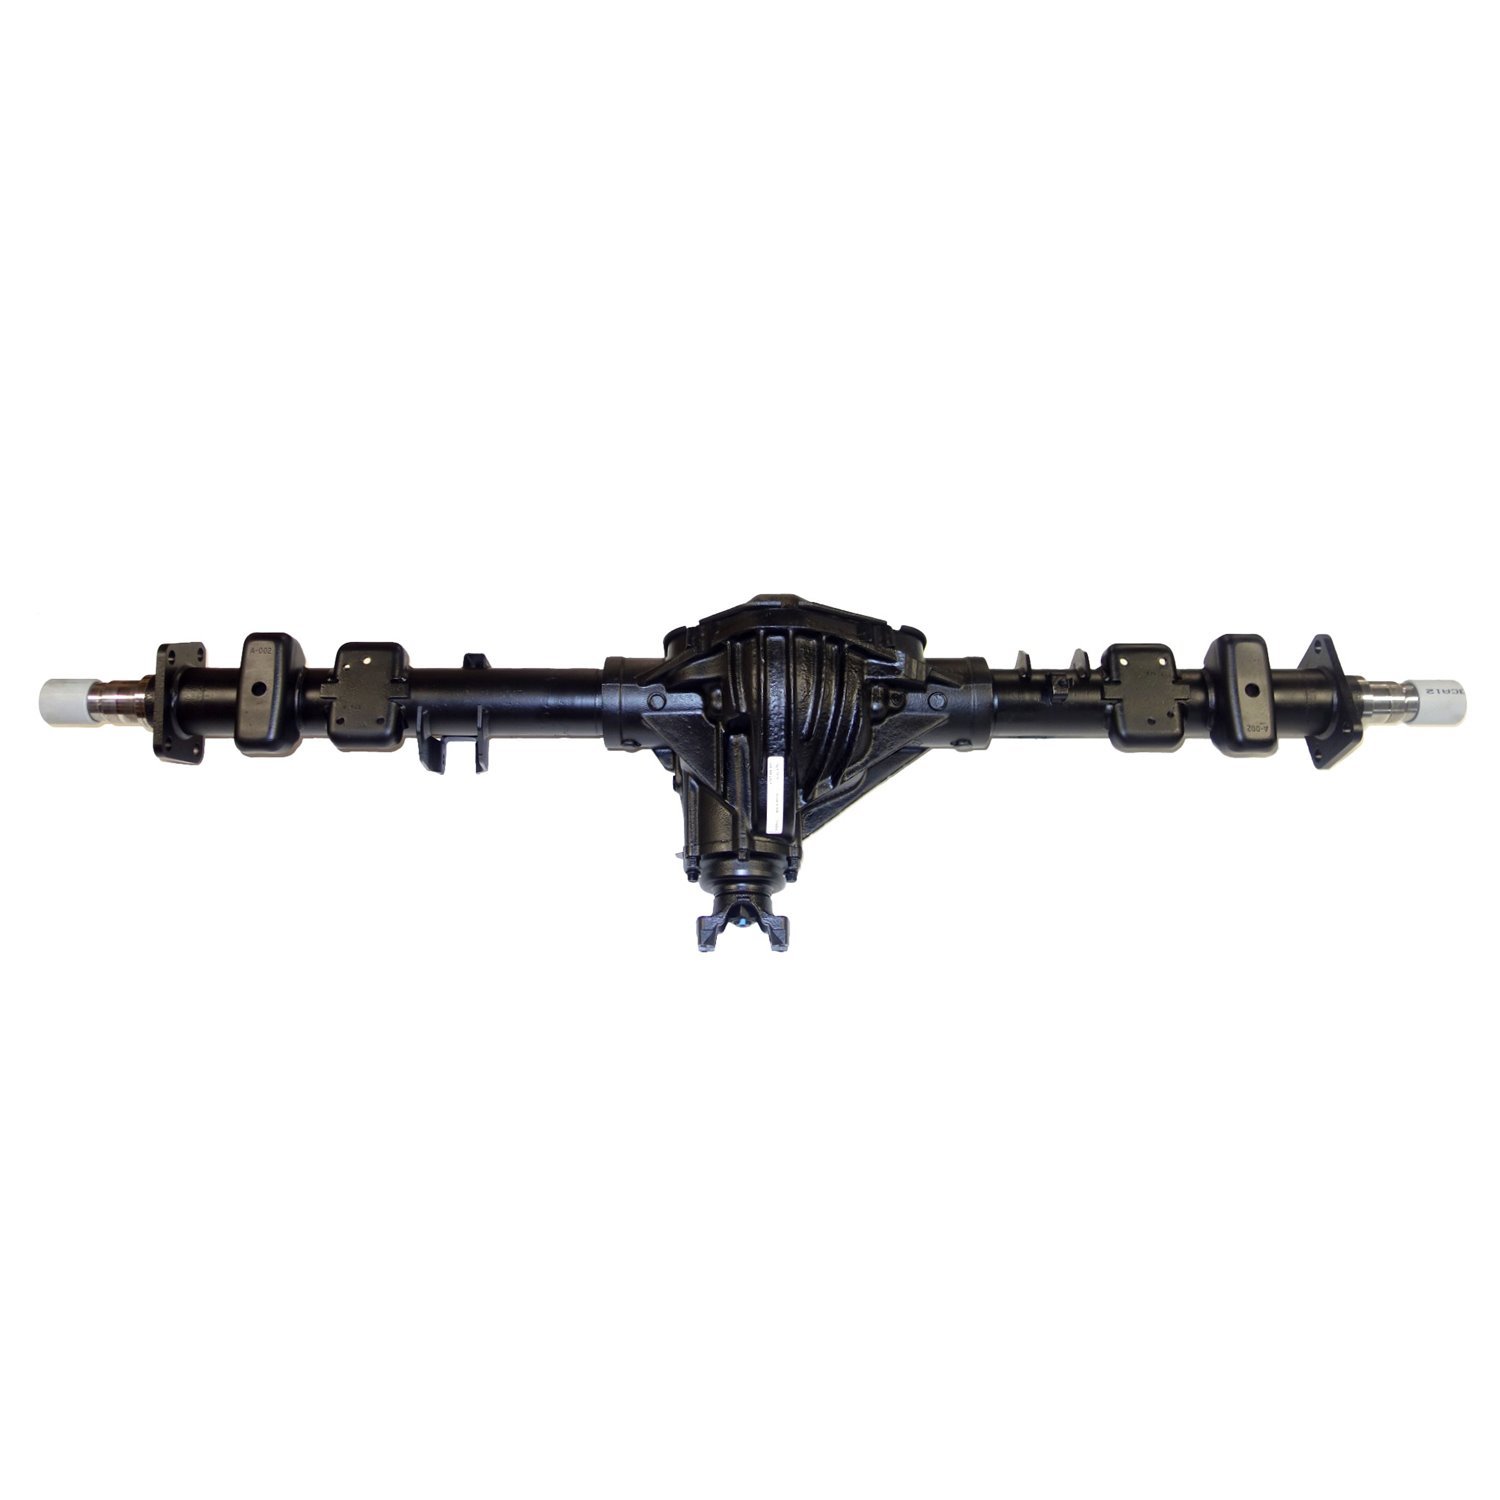 Remanufactured Complete Axle Assembly for GM 14 Bolt Truck 01-05 GM 2500 3.73 Ratio